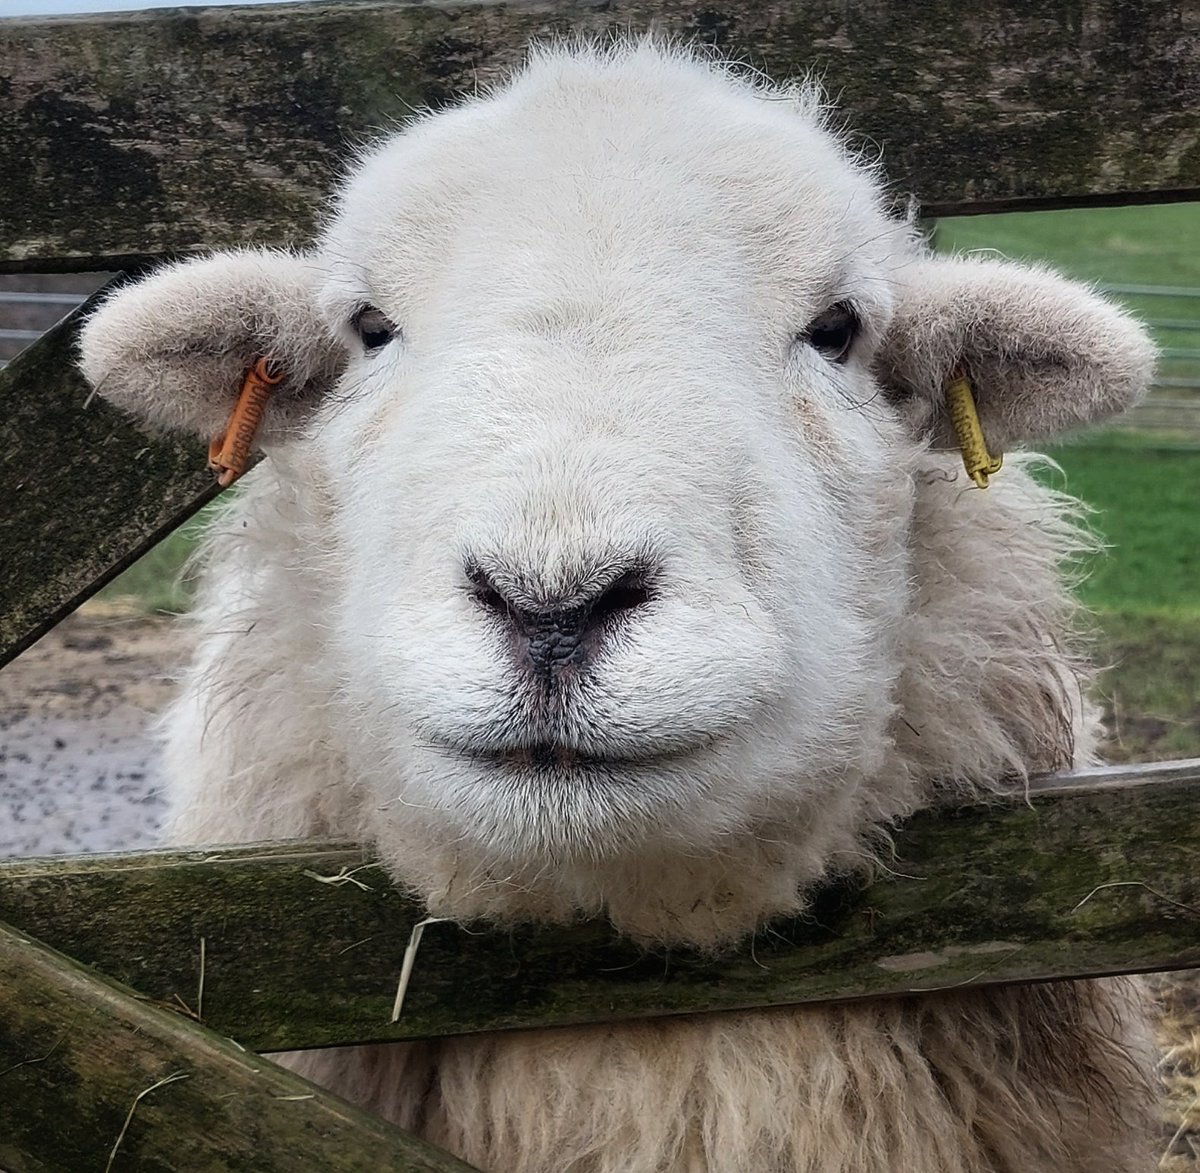 Droopsy's lovely face to greet me as I stepped out the door this morning. Wondering if his hay is on its way... #herdwicks #haytime #hillfarm #peakdistrict #farmstay